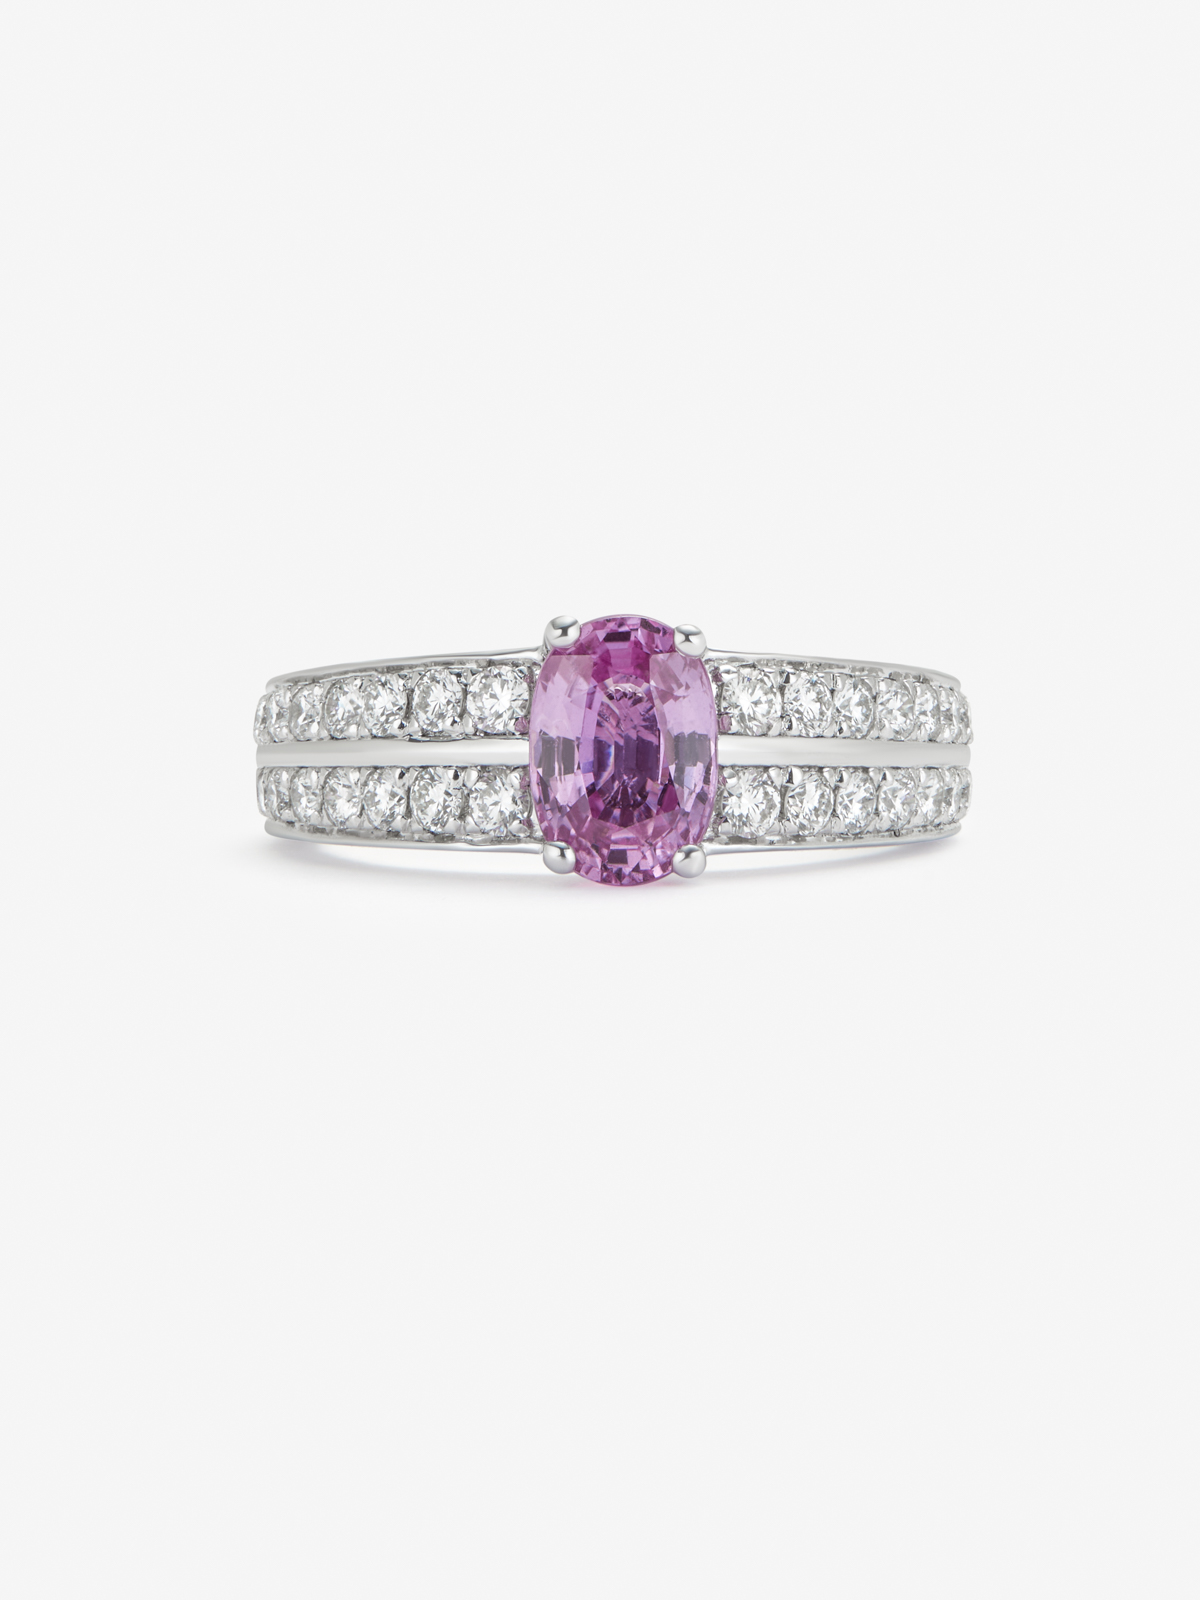 18K white gold ring with vivid pink sapphire in oval cut of 1.46 cts and 32 brilliant-cut diamonds with a total of 0.61 cts